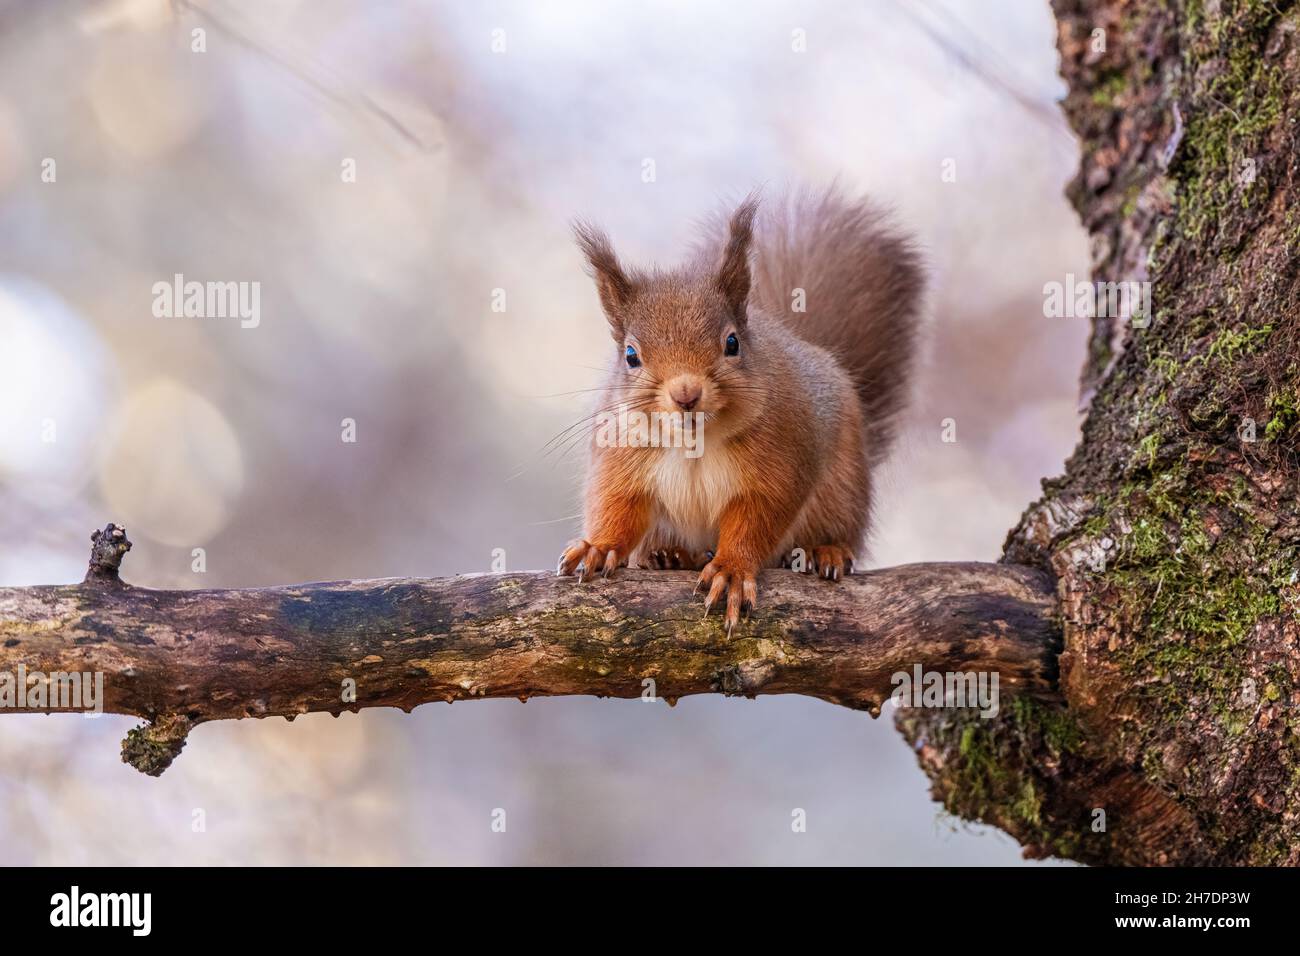 Young red squirrel (Sciurus vulgaris) sitting on branch of tree looking towards camera in deciduous woodland Stock Photo